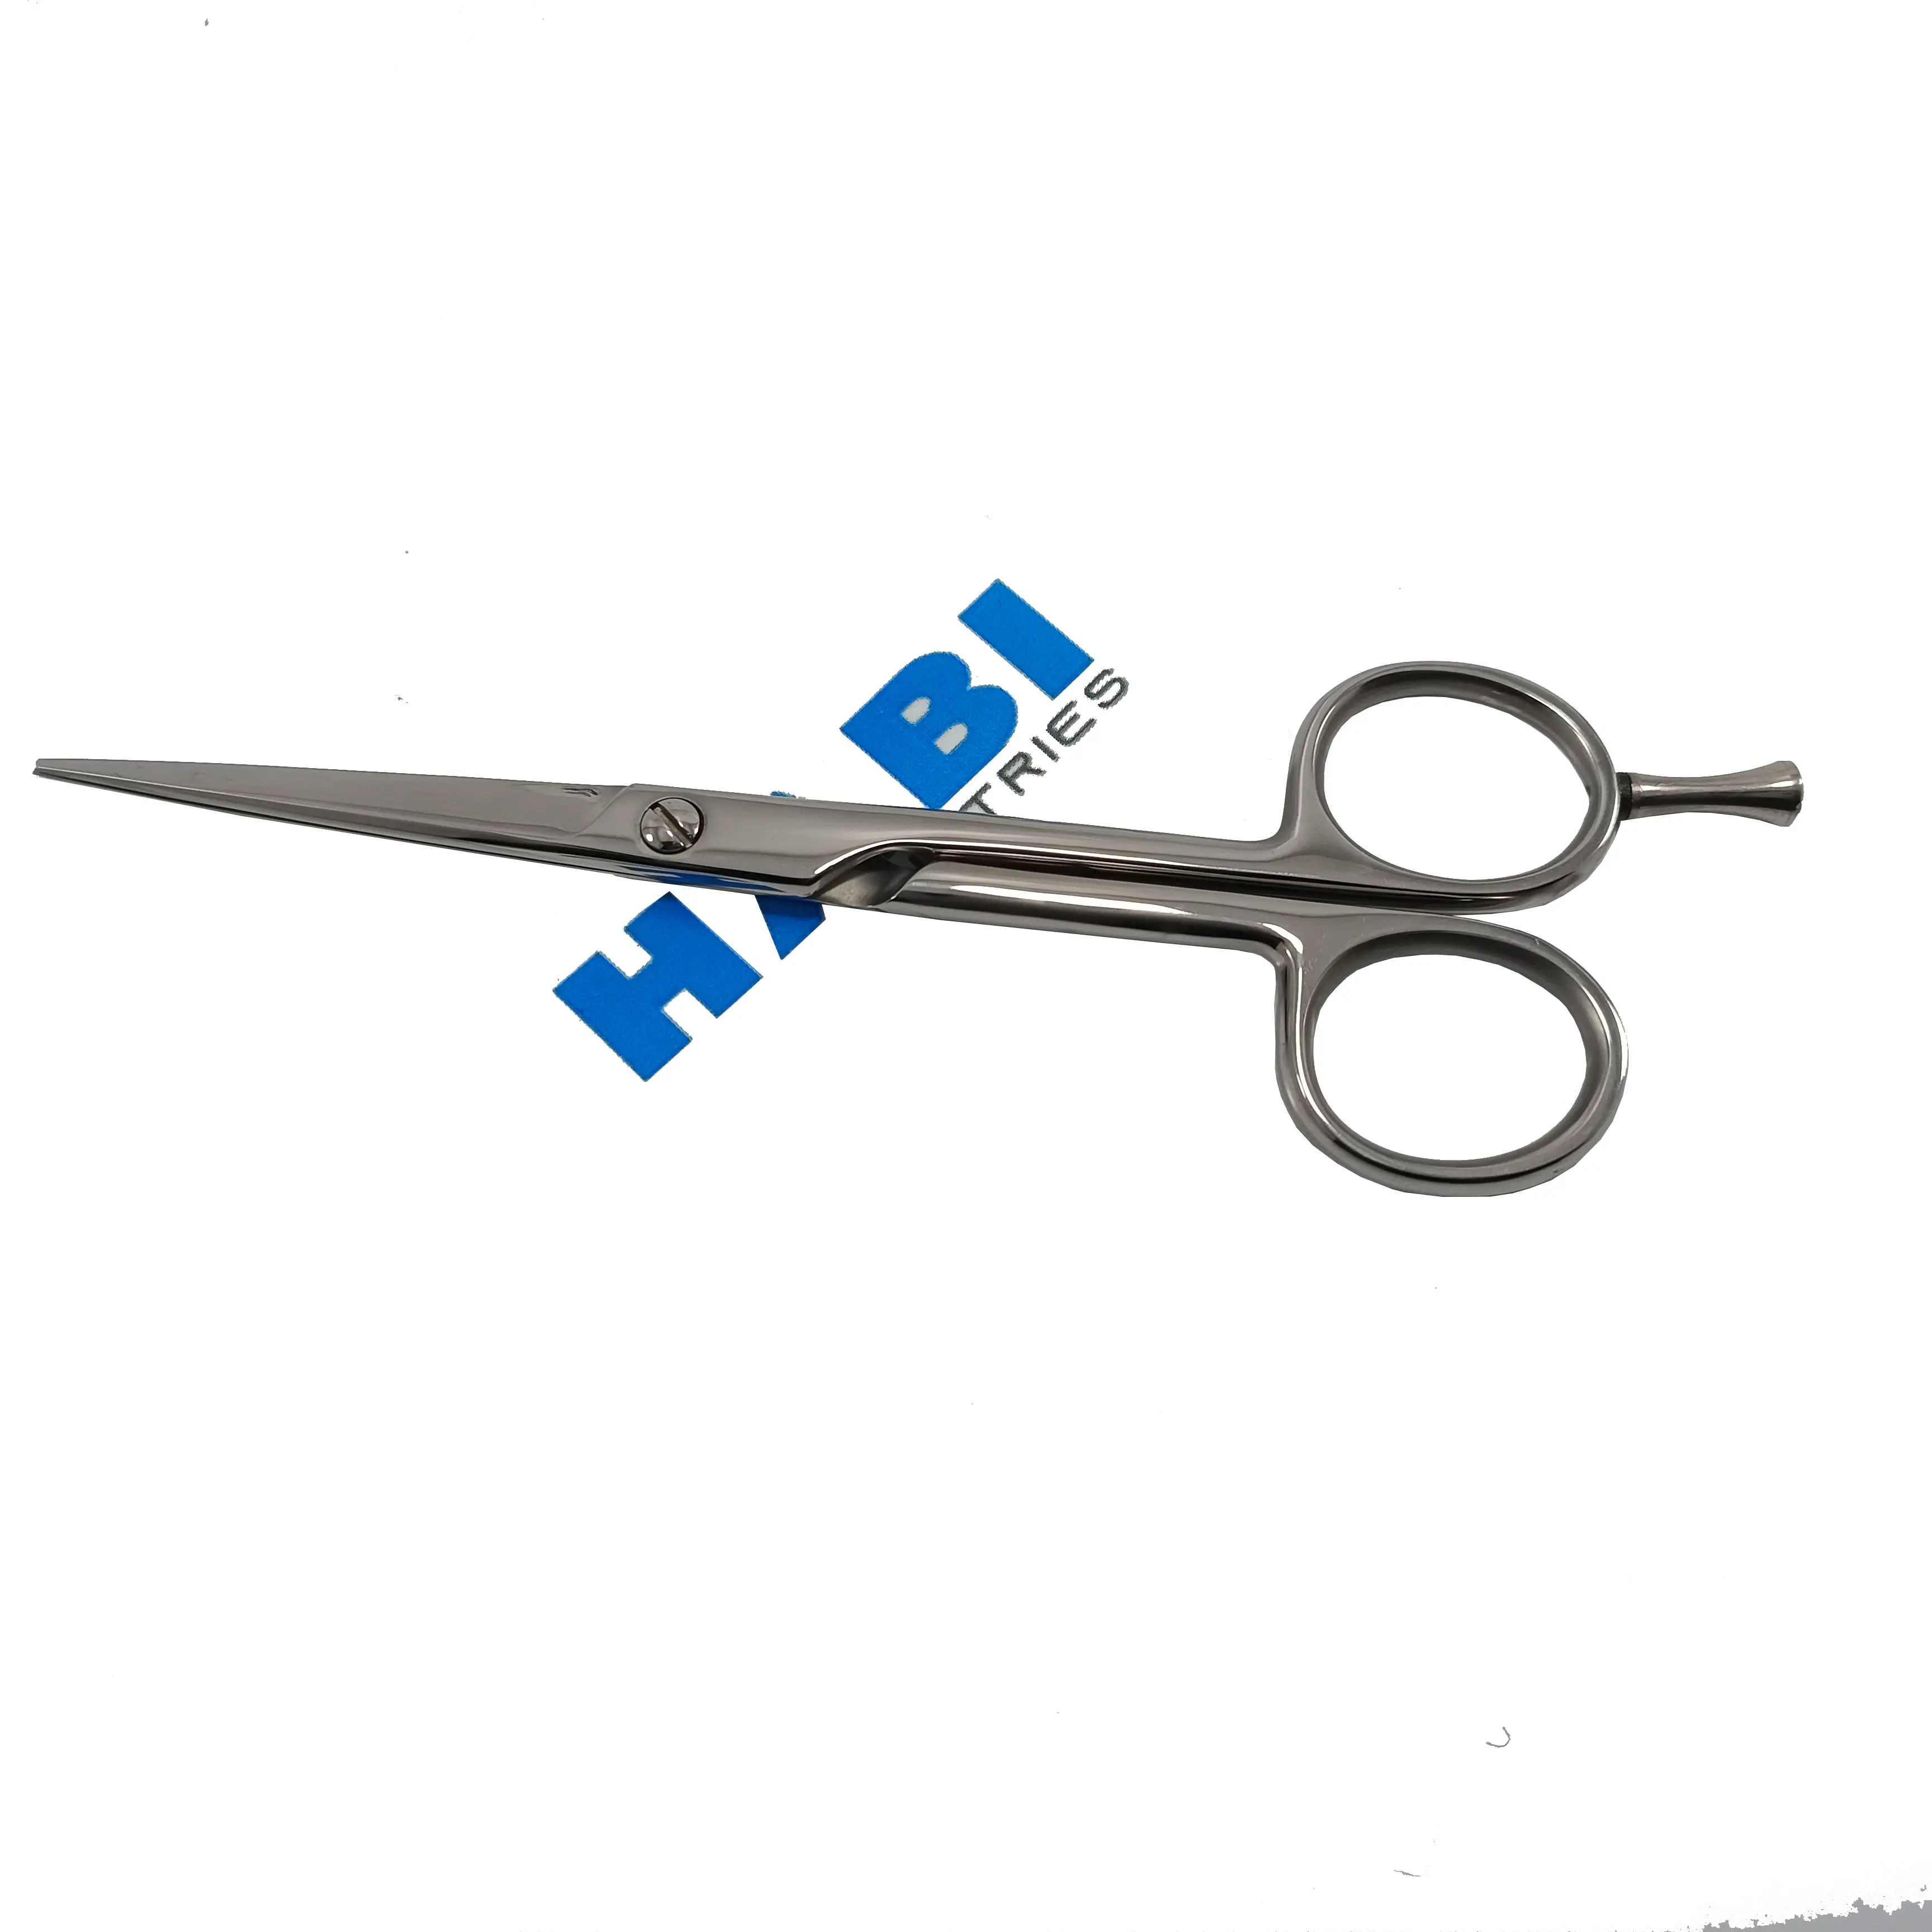 high Carbon stainless steel barber hair cutting scissors ergonomic handle for reduces fatigue convex razors edge barber shears